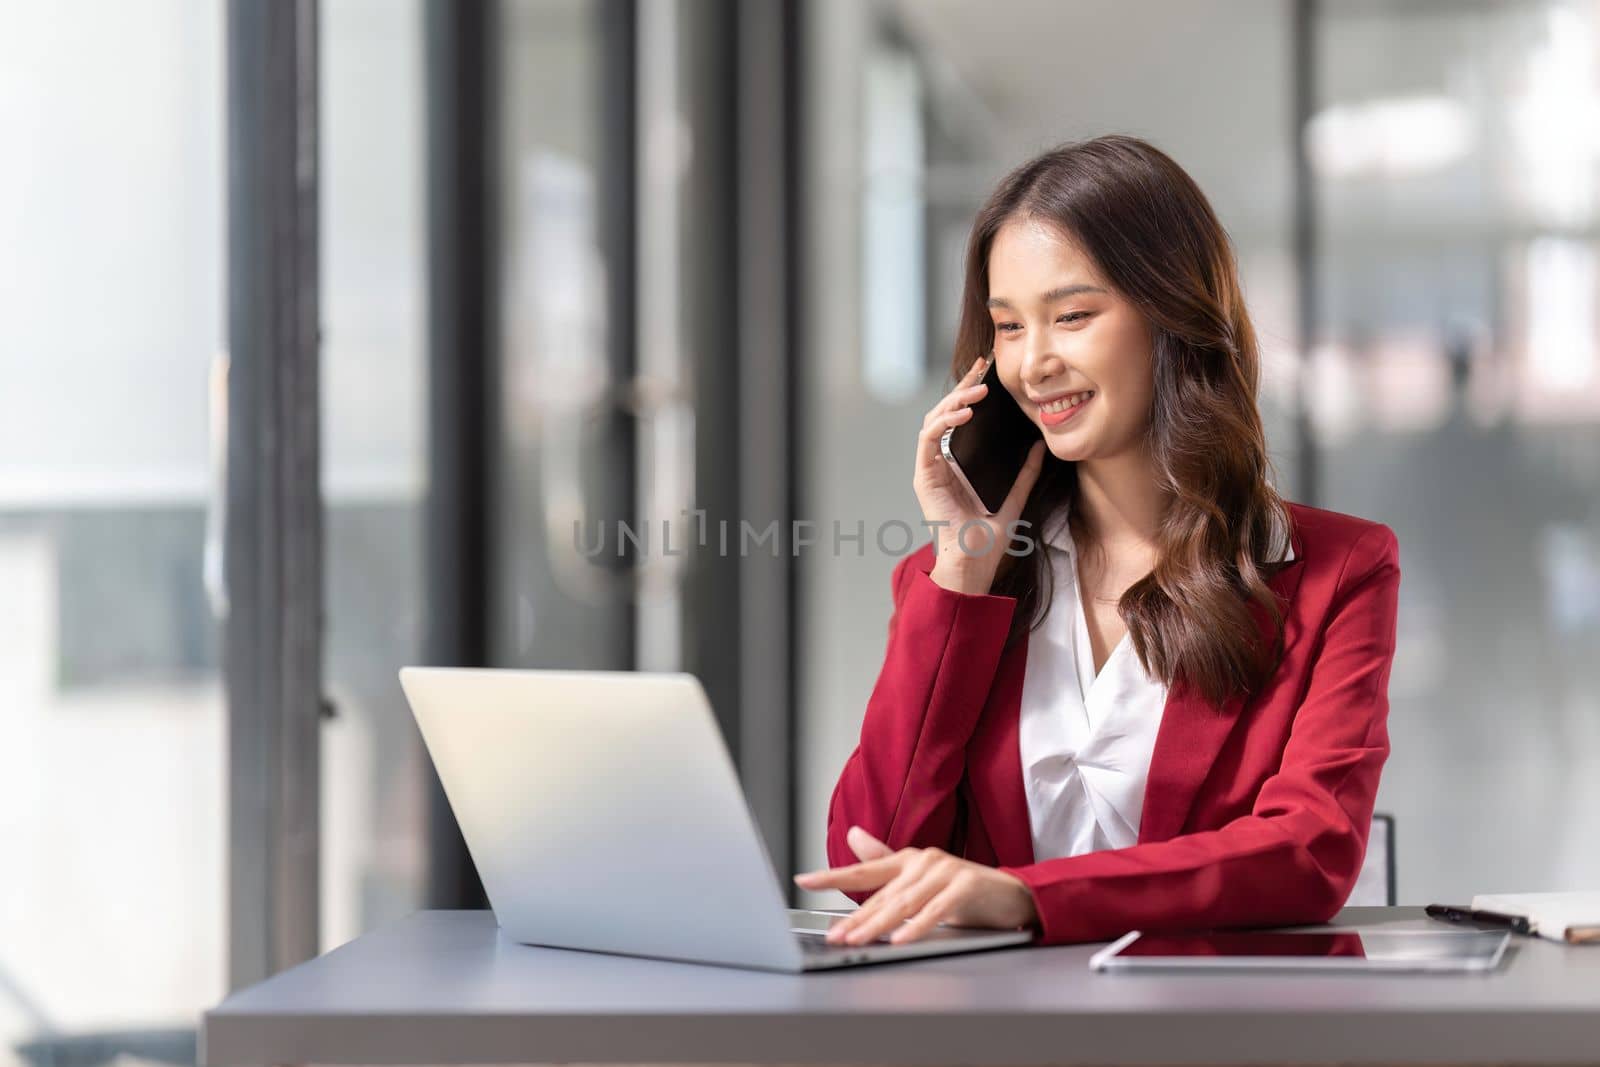 Cheerful young business woman talking on phone working in modern office. Happy positive Asian businesswoman company manager wearing suit making call on cellphone sitting at workplace.